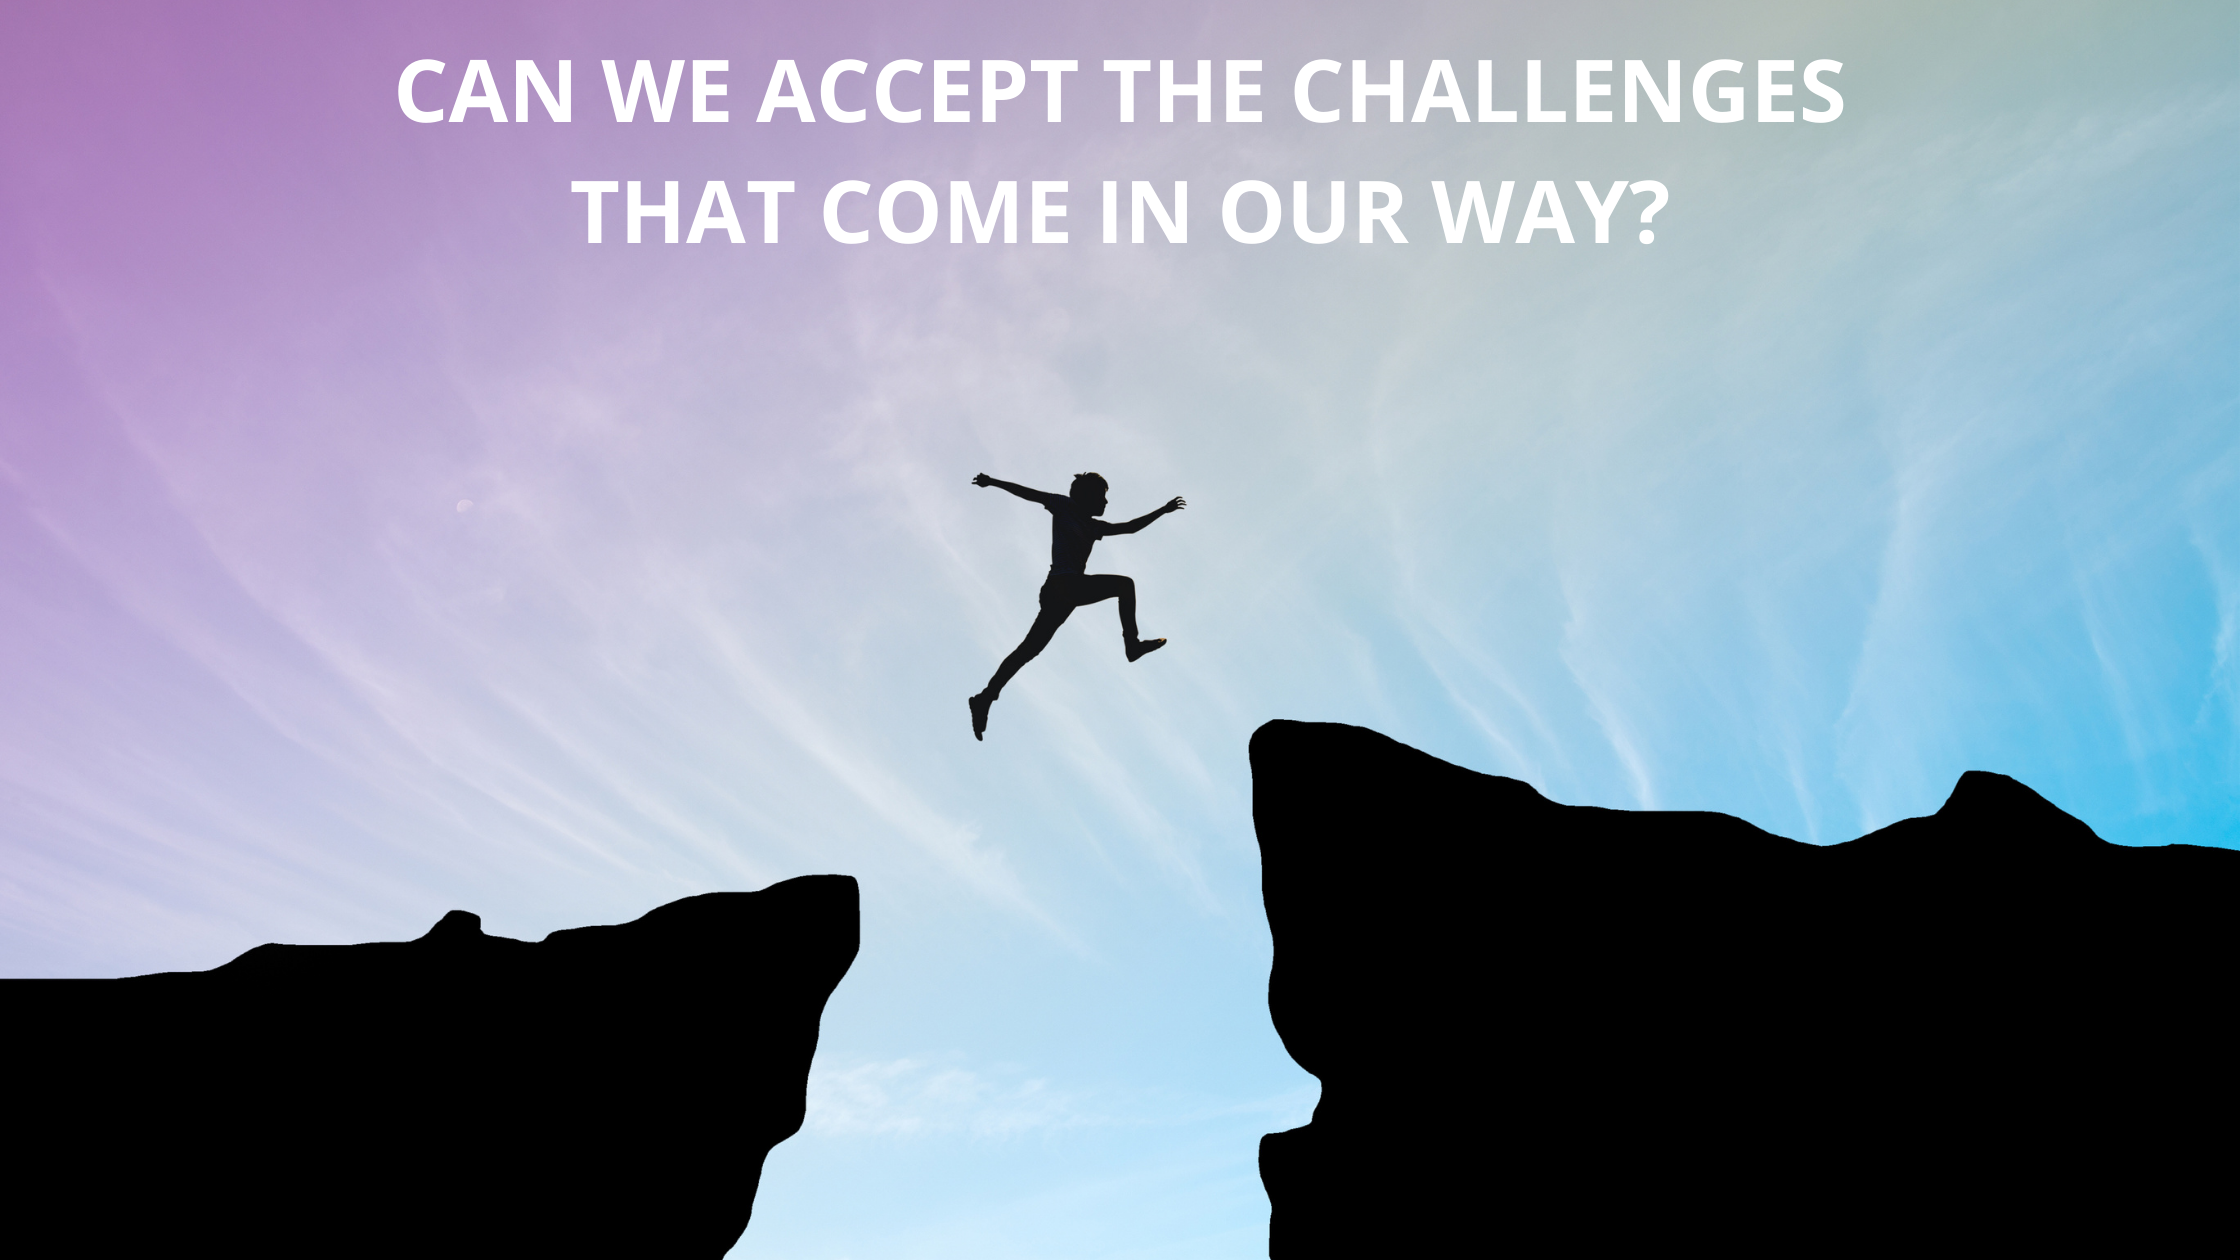 Can we accept the challenges that come in our way?